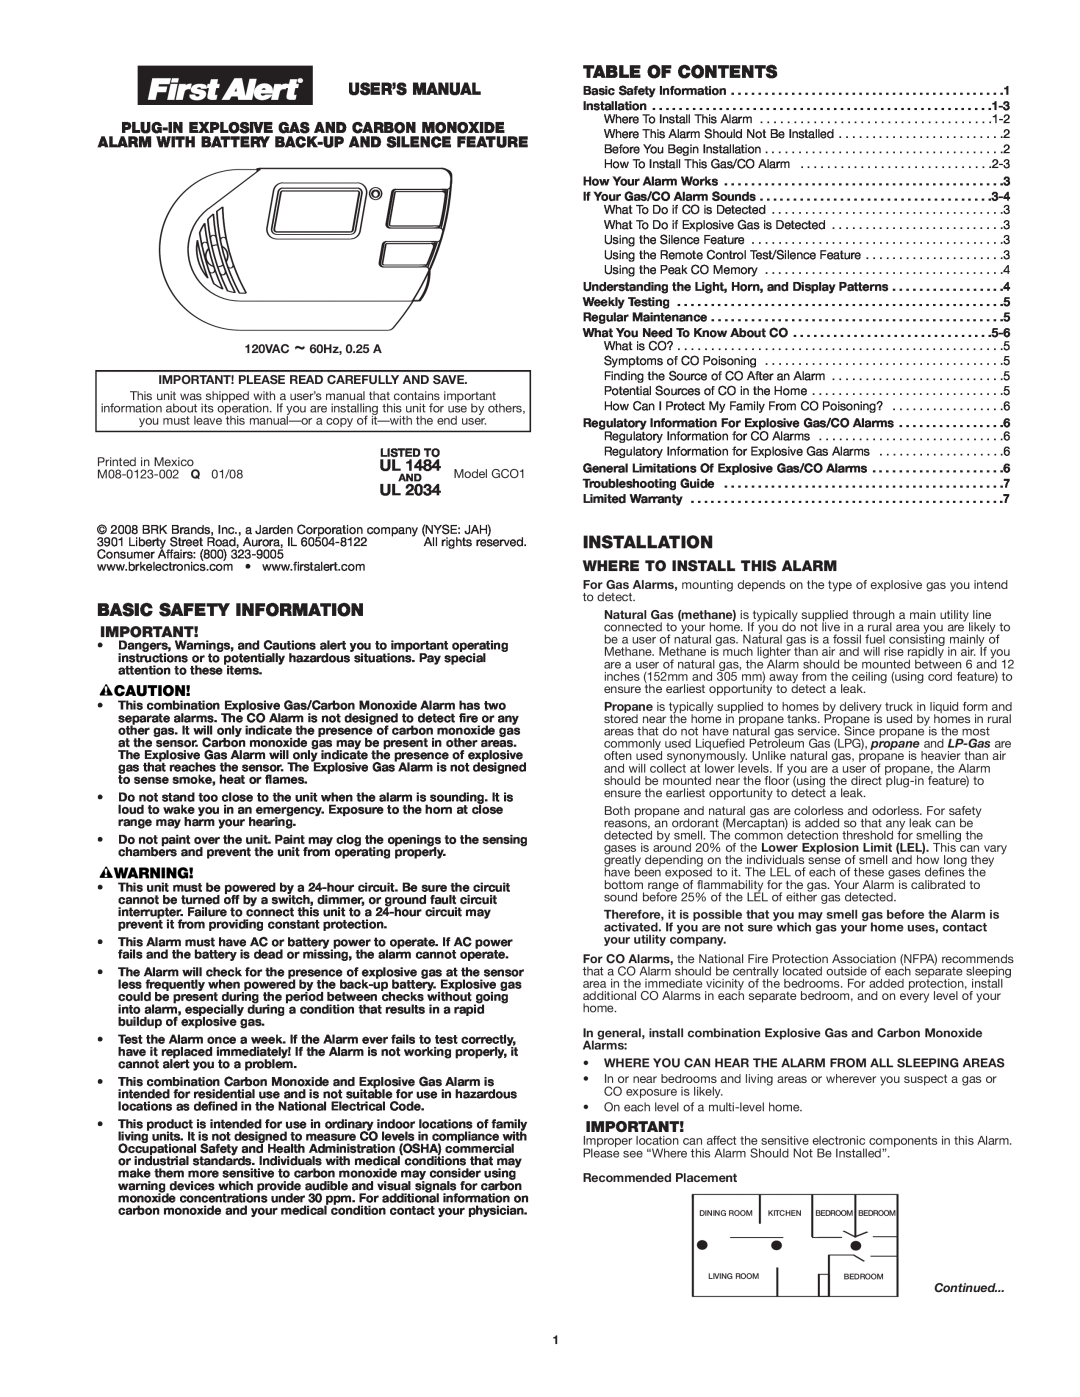 First Alert Model GCO1 user manual Basic Safety Information, Table Of Contents, Installation, Where To Install This Alarm 